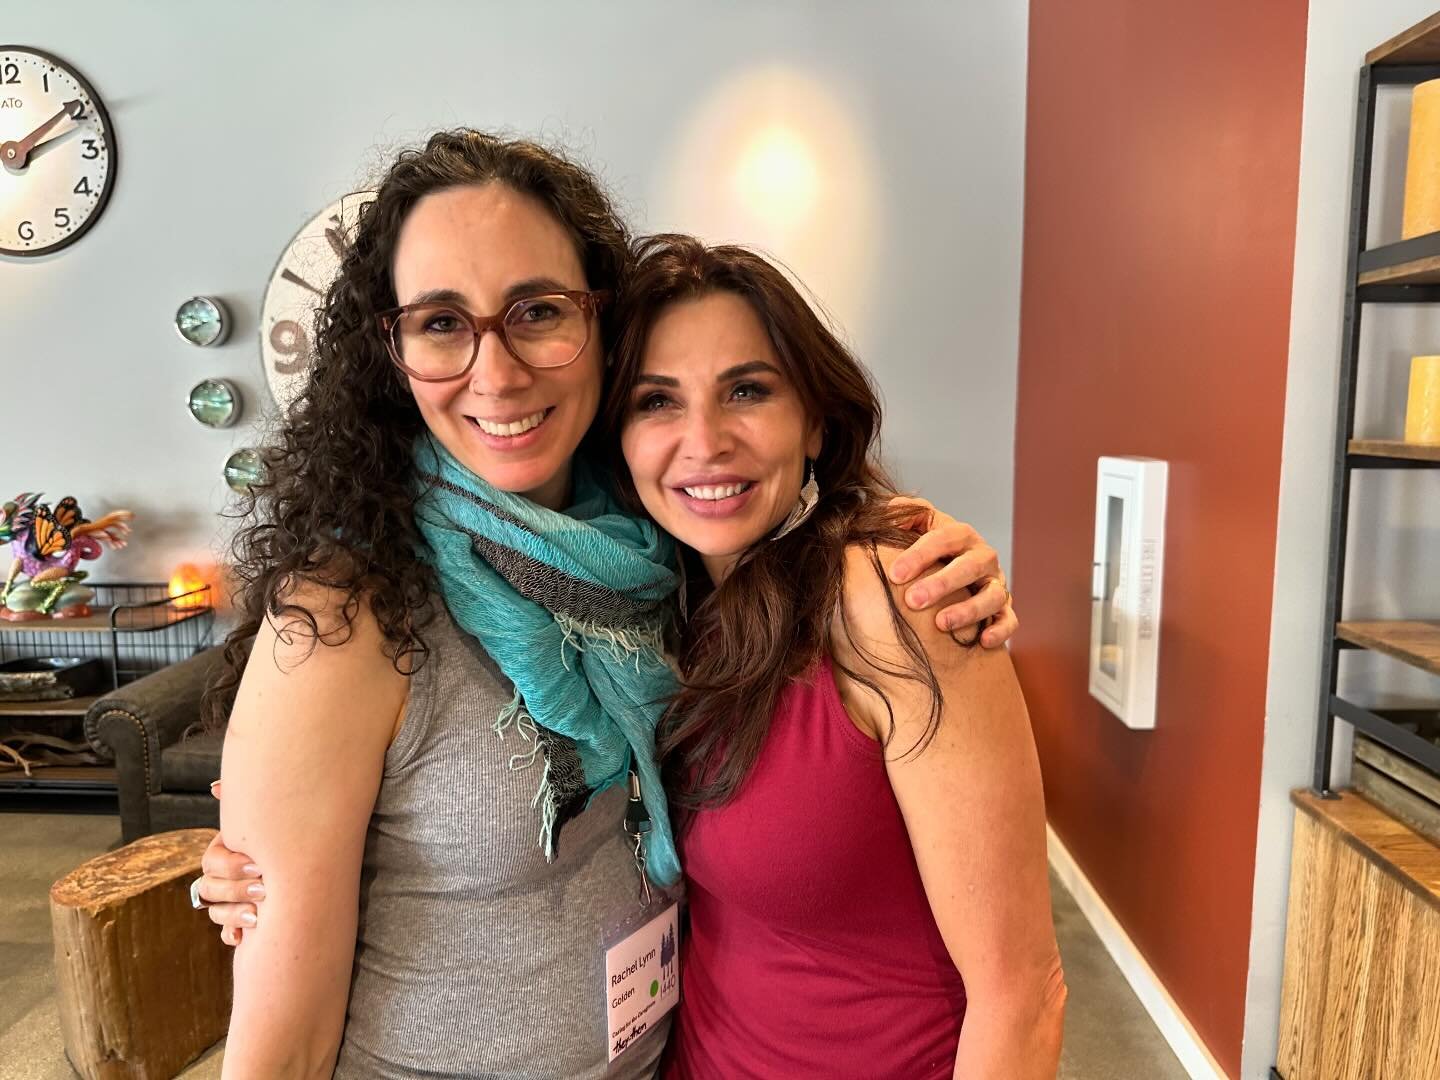 I was happy to run into my friend and former CIIS CPTR classmate, Dr. Rachel Golden on campus today. Rachel runs Golden Psychology, which is a NYC-based therapy practice providing identity-affirming care to individuals, families and partners. Check i